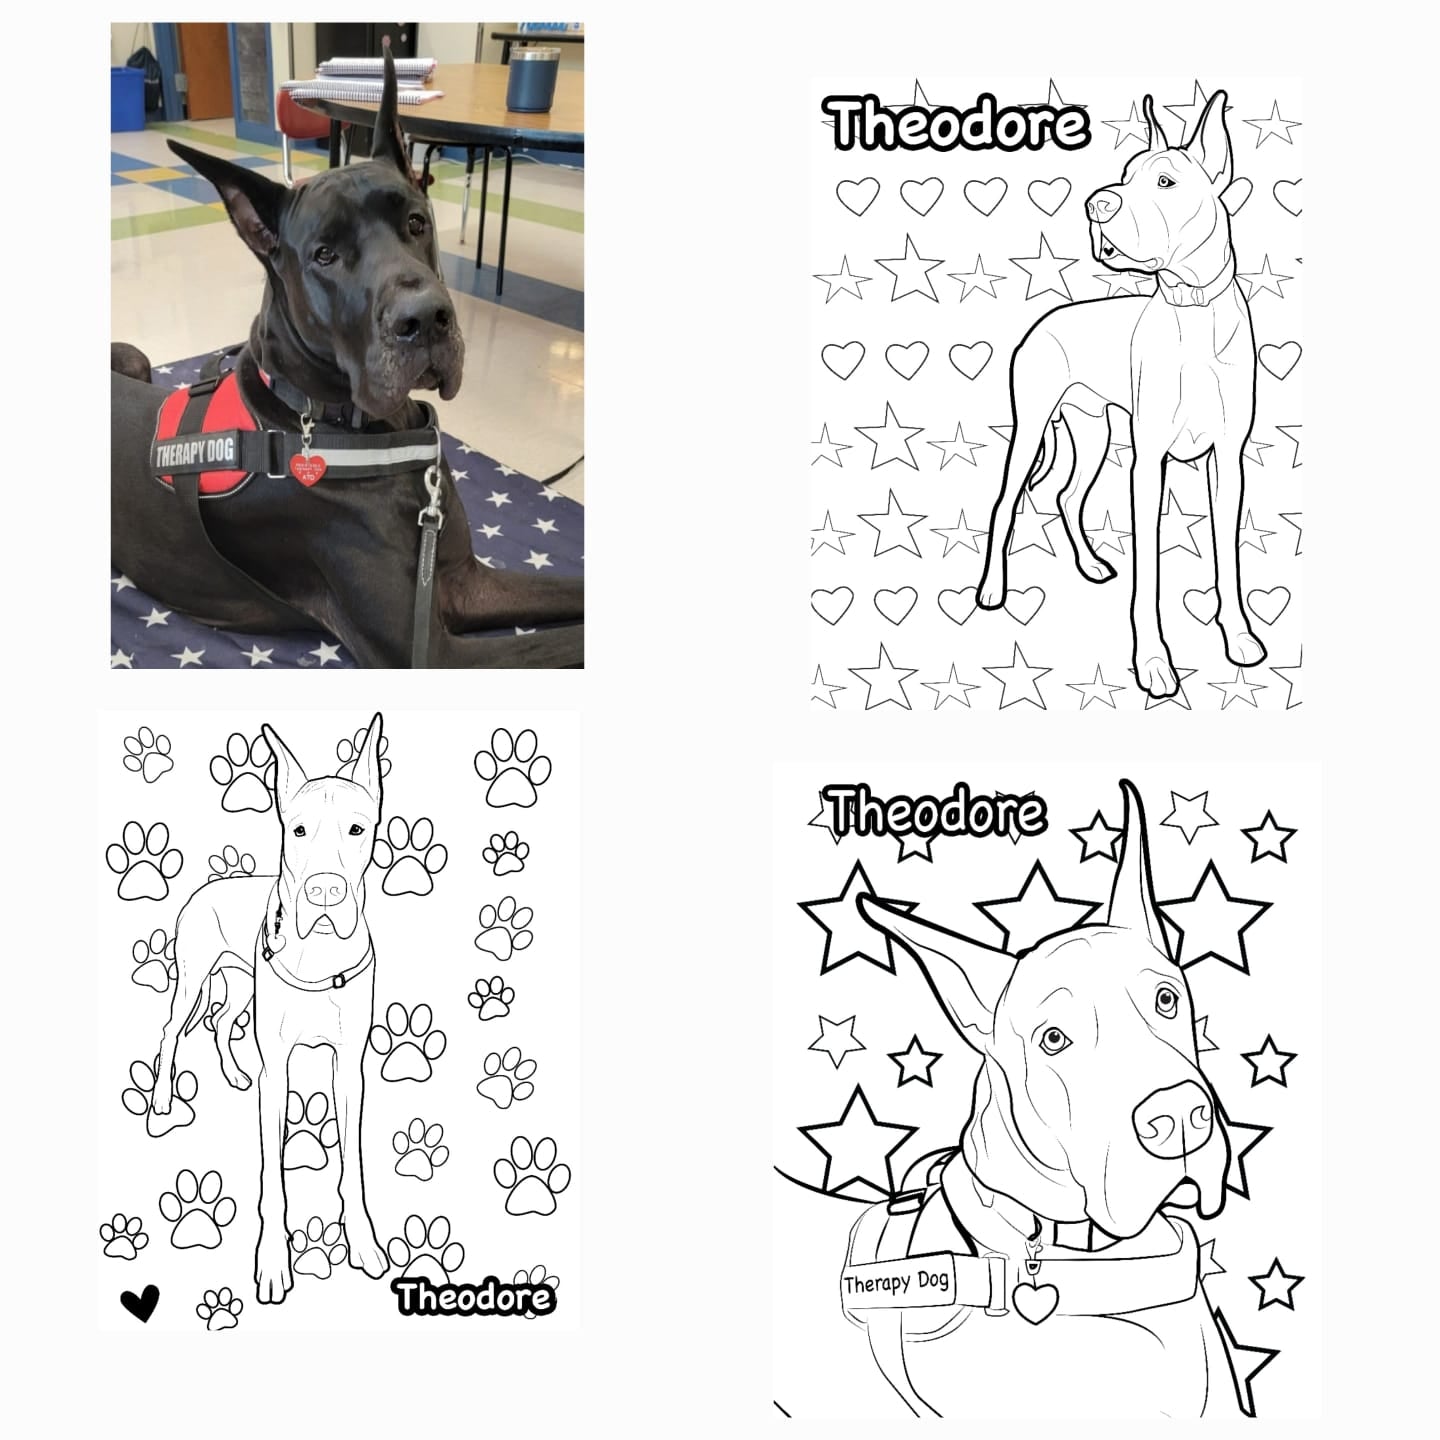 Coloring Page Of Your Pet